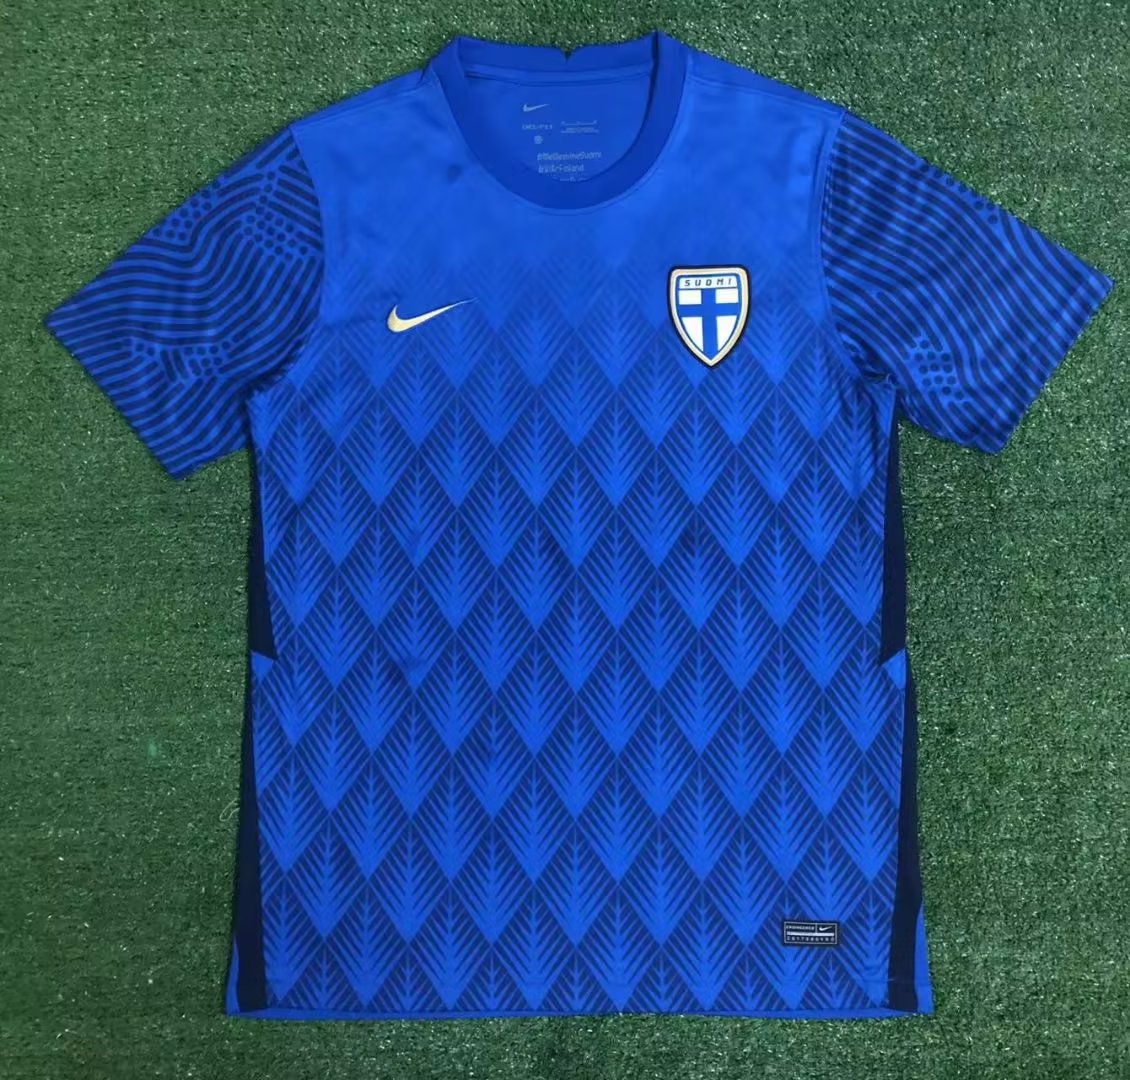 Finland Blank Away Soccer Country Jersey